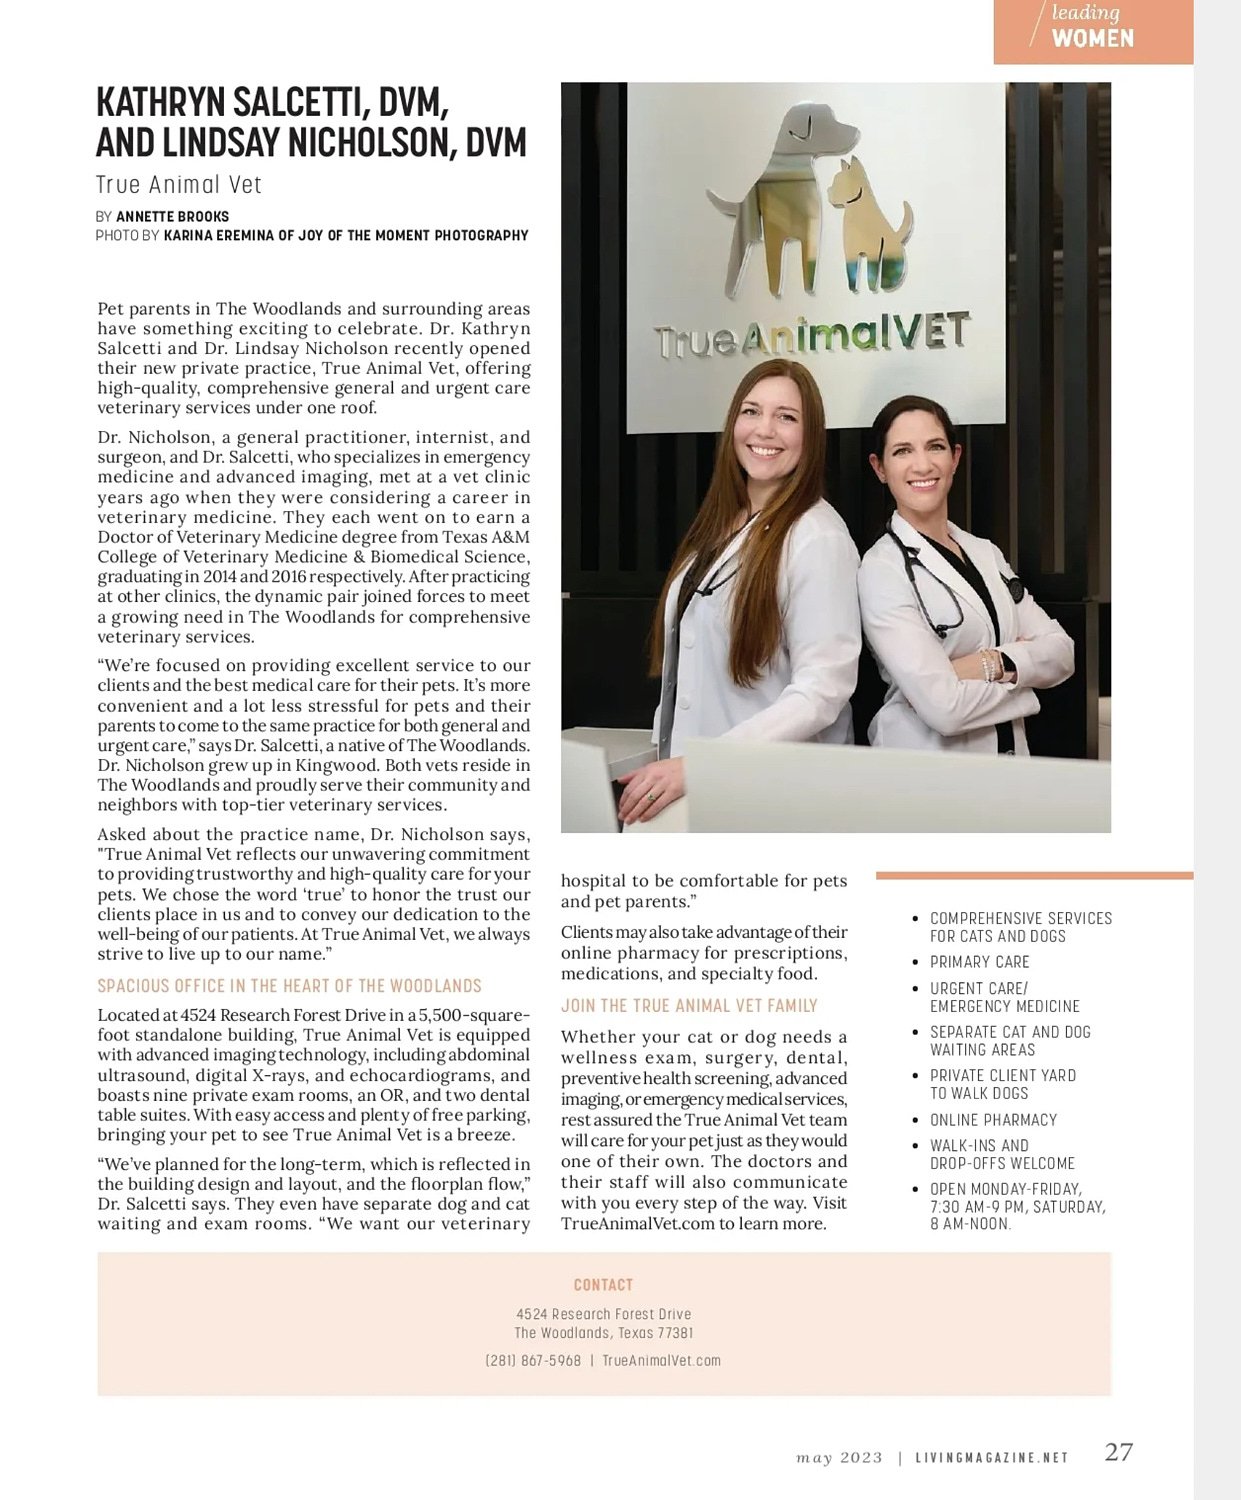  THE WOODLANDS, TEXAS - MAY 1ST 2023:  two female veterinarians, Dr. Lindsay Nicholson and Dr. Kathryn Salcetti of True Animal Vet for a Living Magazine feature as Inspiring Women of May 2023. 